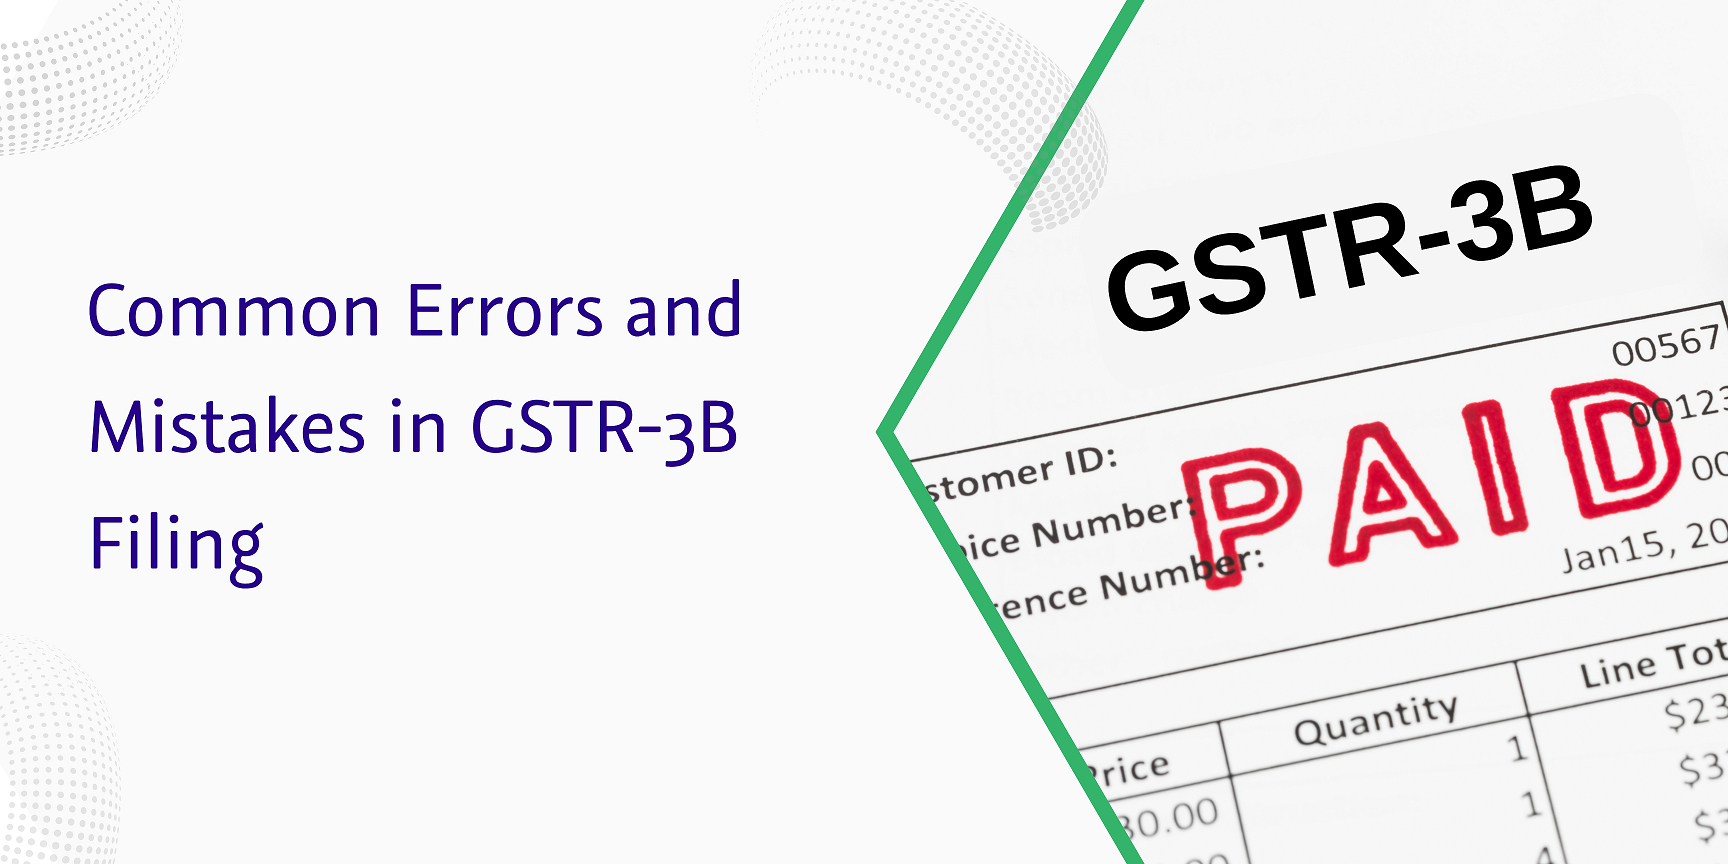 common errors and mistakes in gstr-3b filing